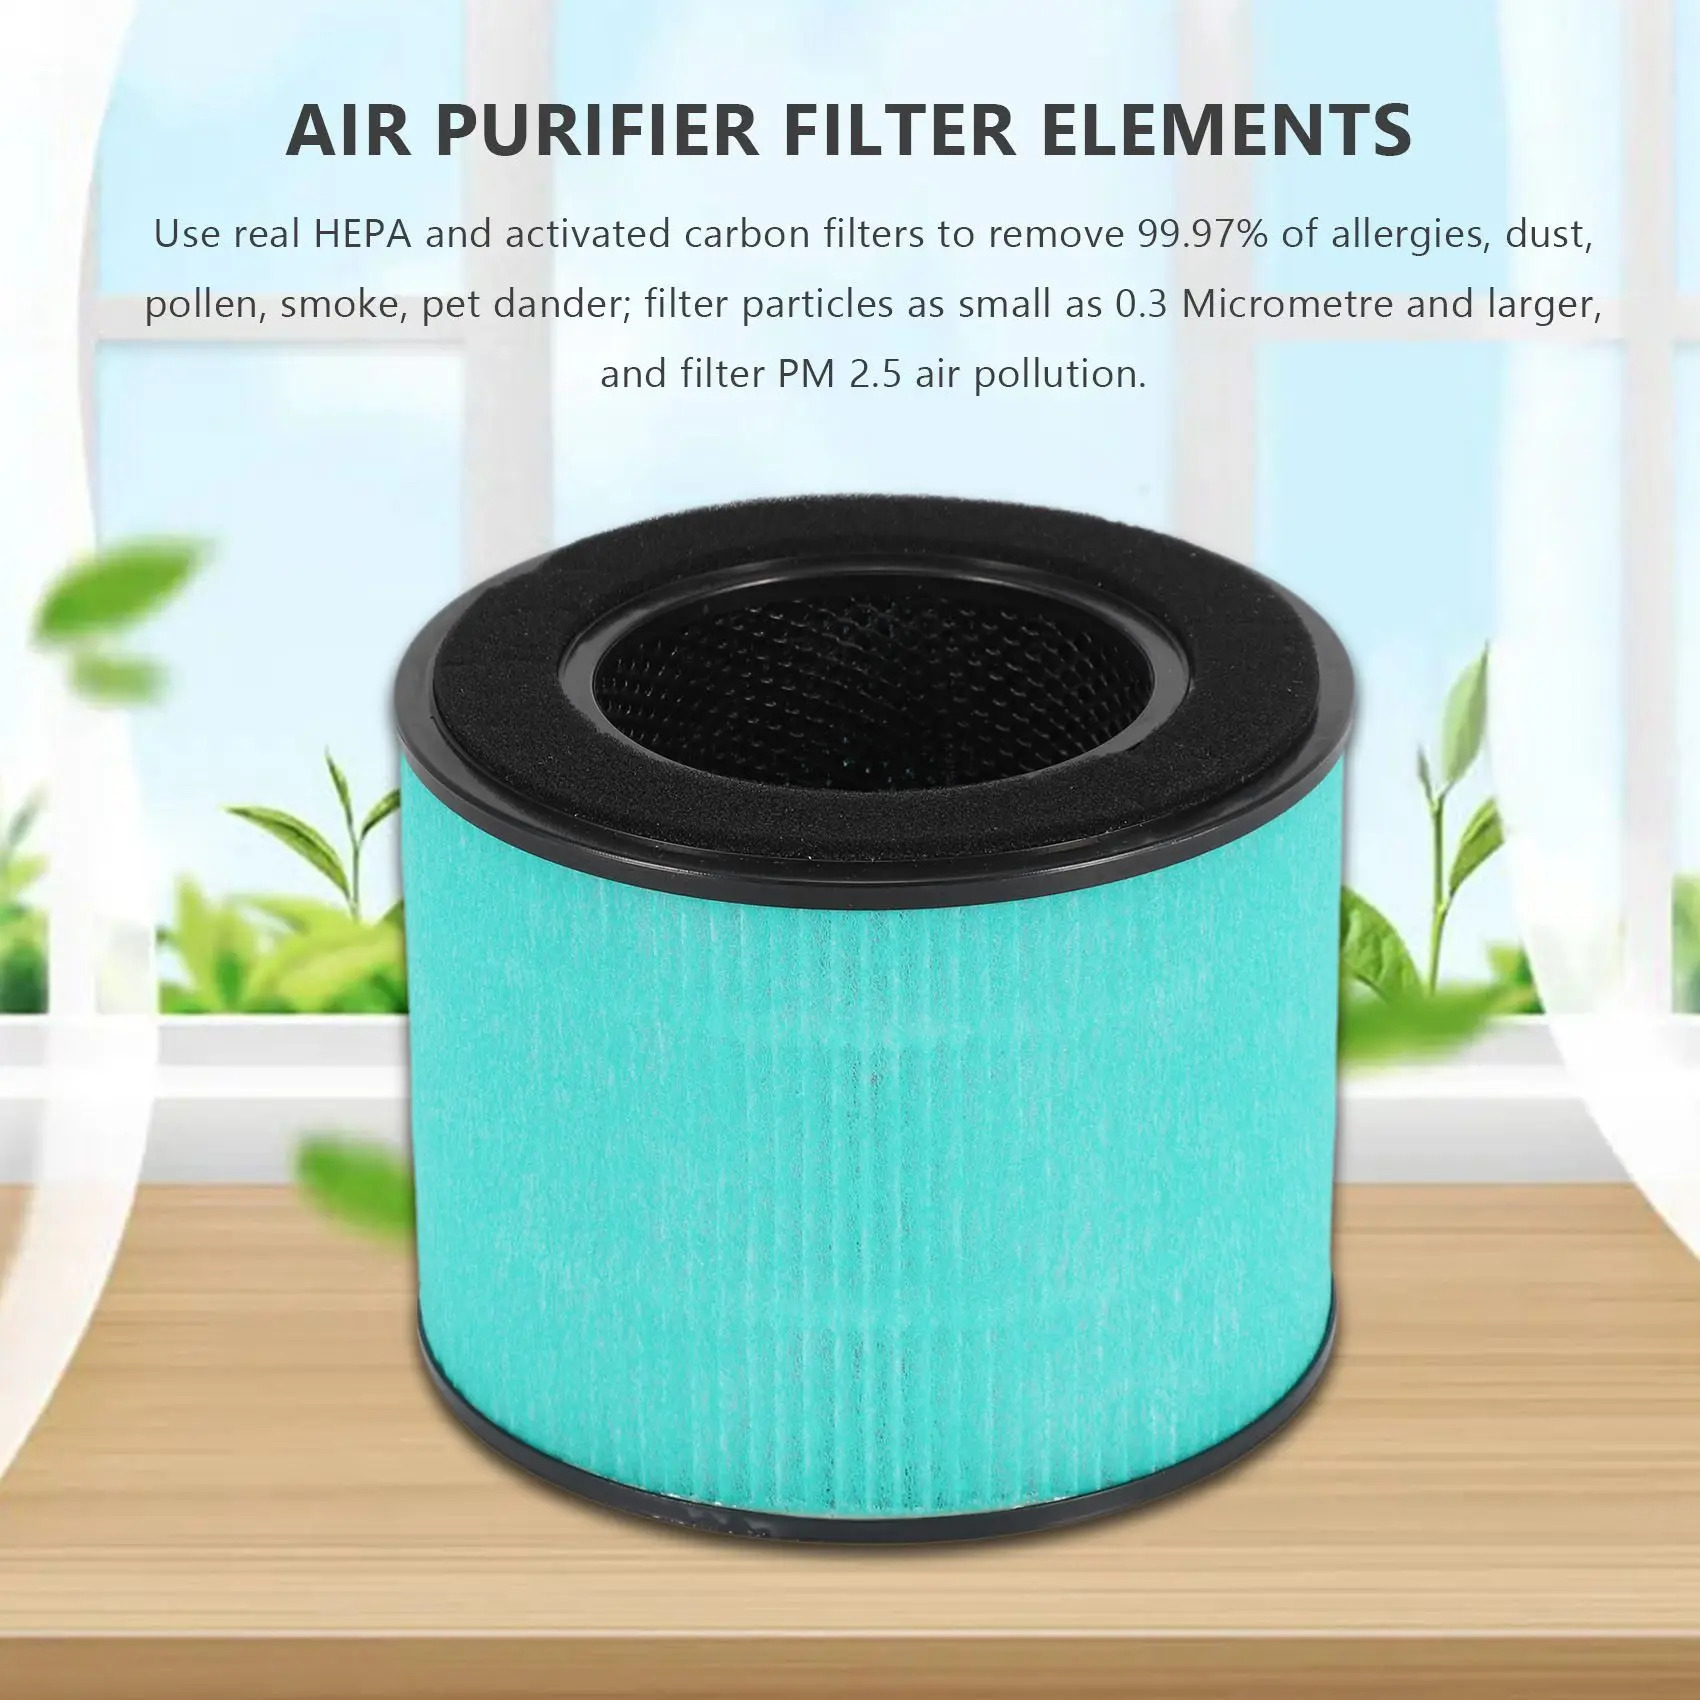 

Replacement HEPA Filter for PARTU BS-08,3-In-1 Filter System Include Pre-Filter,Real HEPA Filter,Activated Carbon Filter